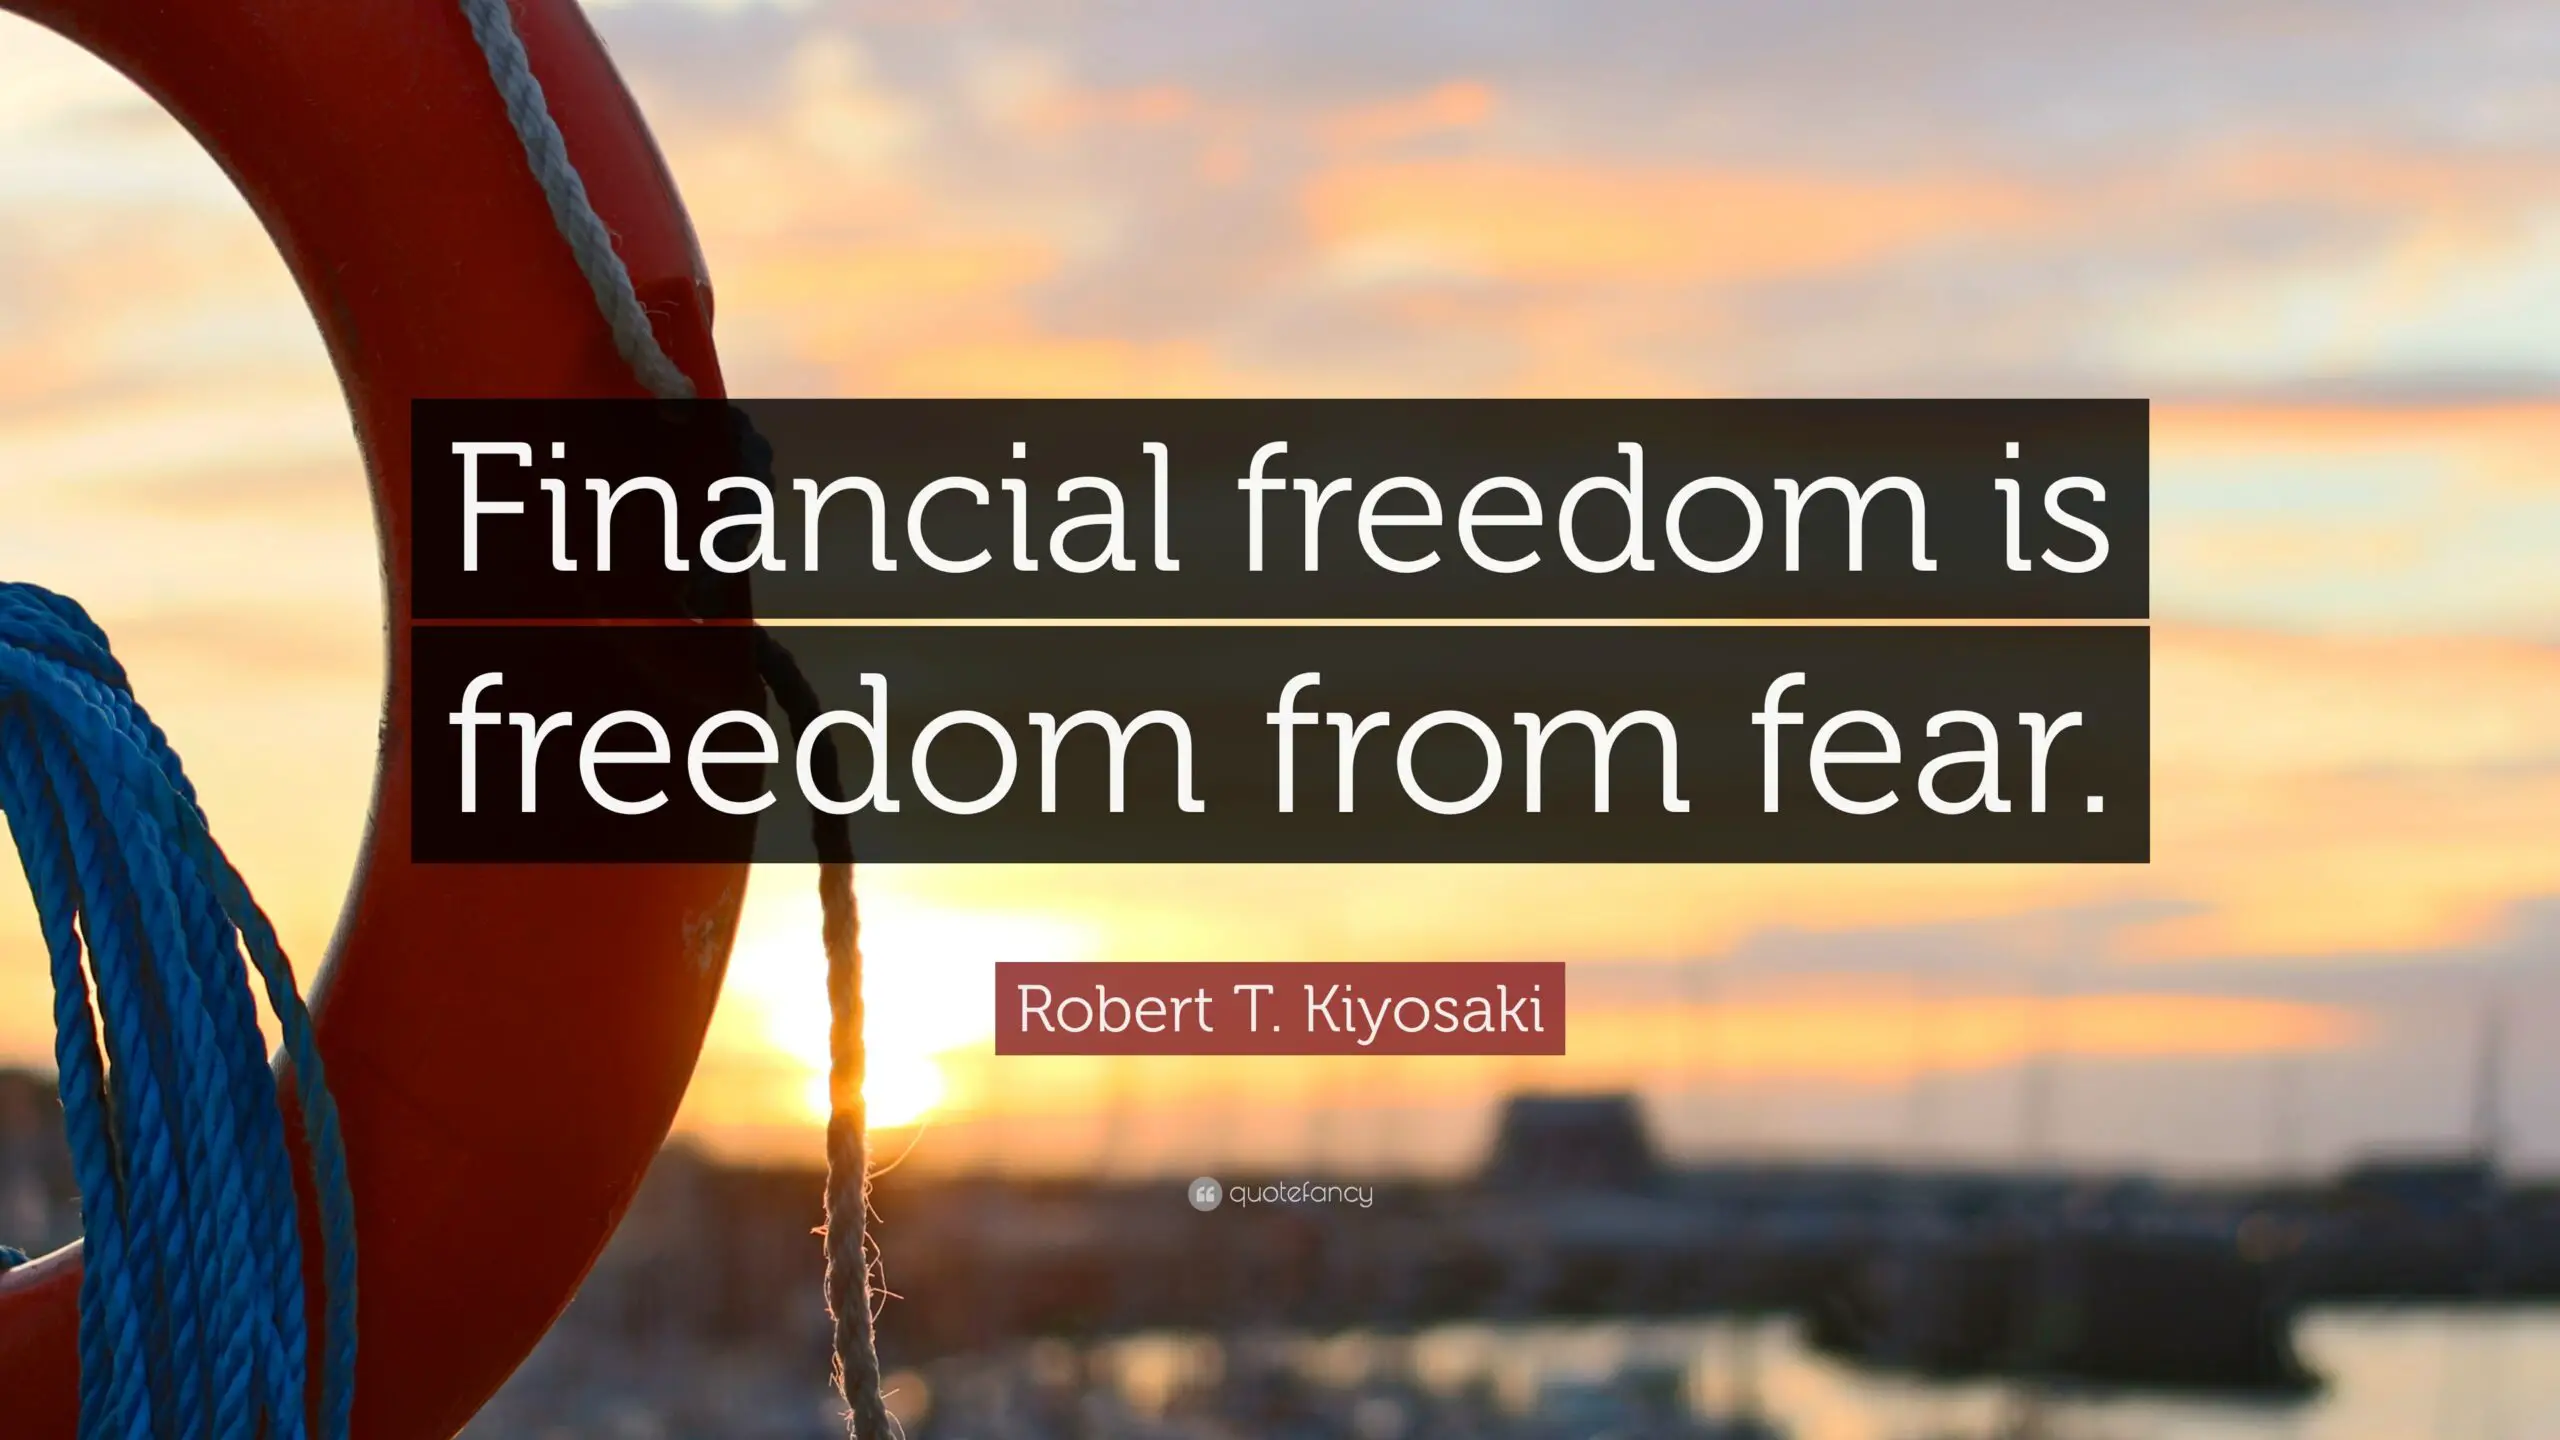 Inspiring Quotes about Financial Freedom - Teen Financial Freedom